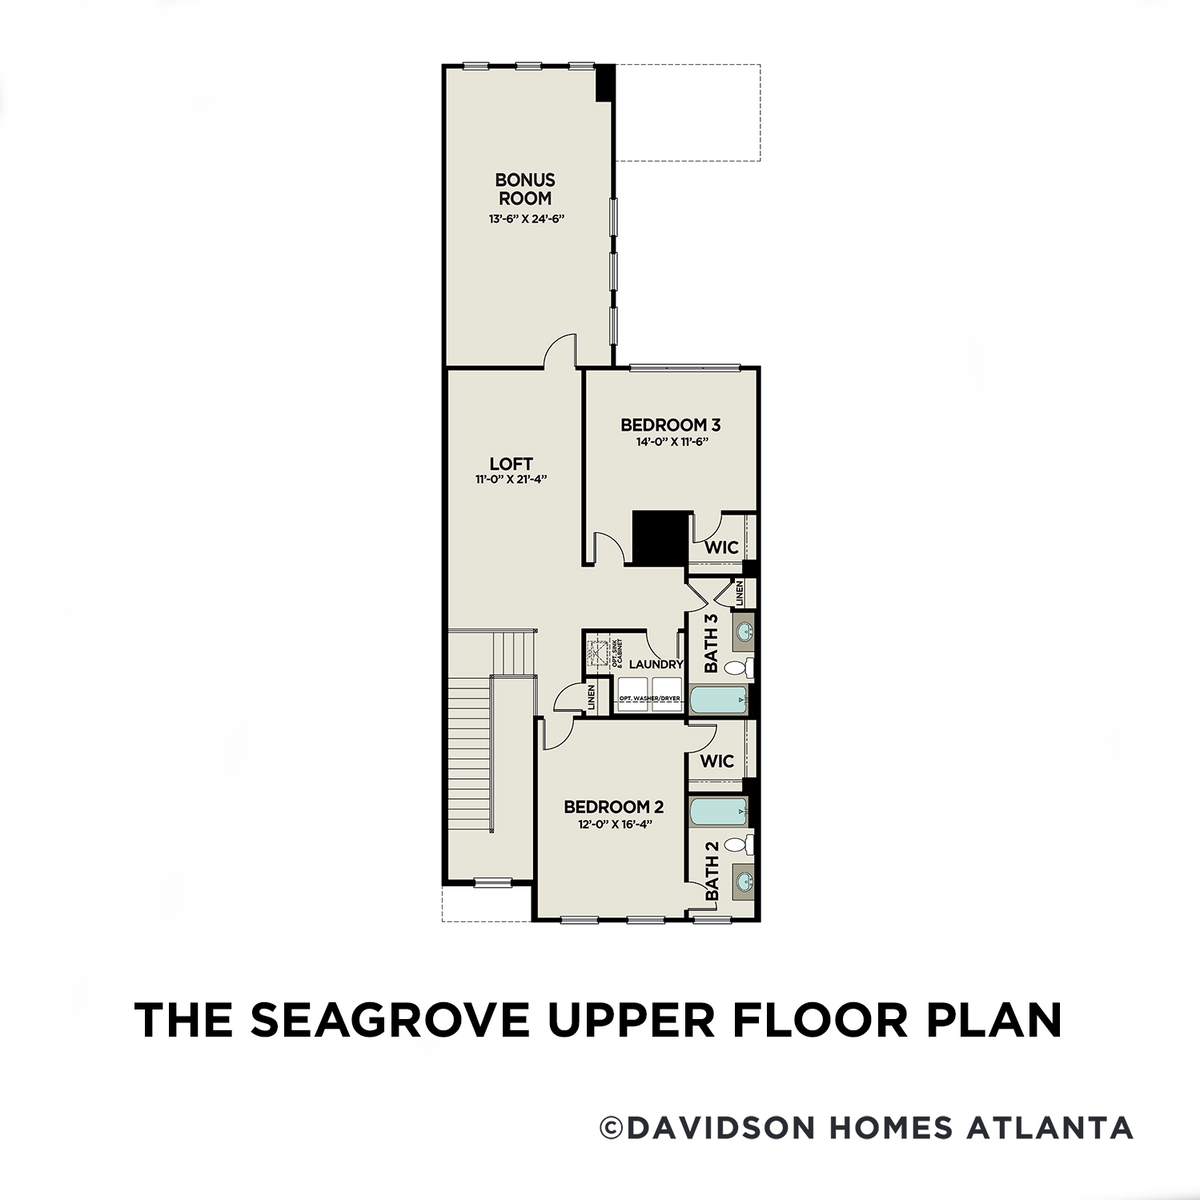 2 - The Seagrove C floor plan layout for 688 Stickley Oak Way in Davidson Homes' The Village at Towne Lake community.